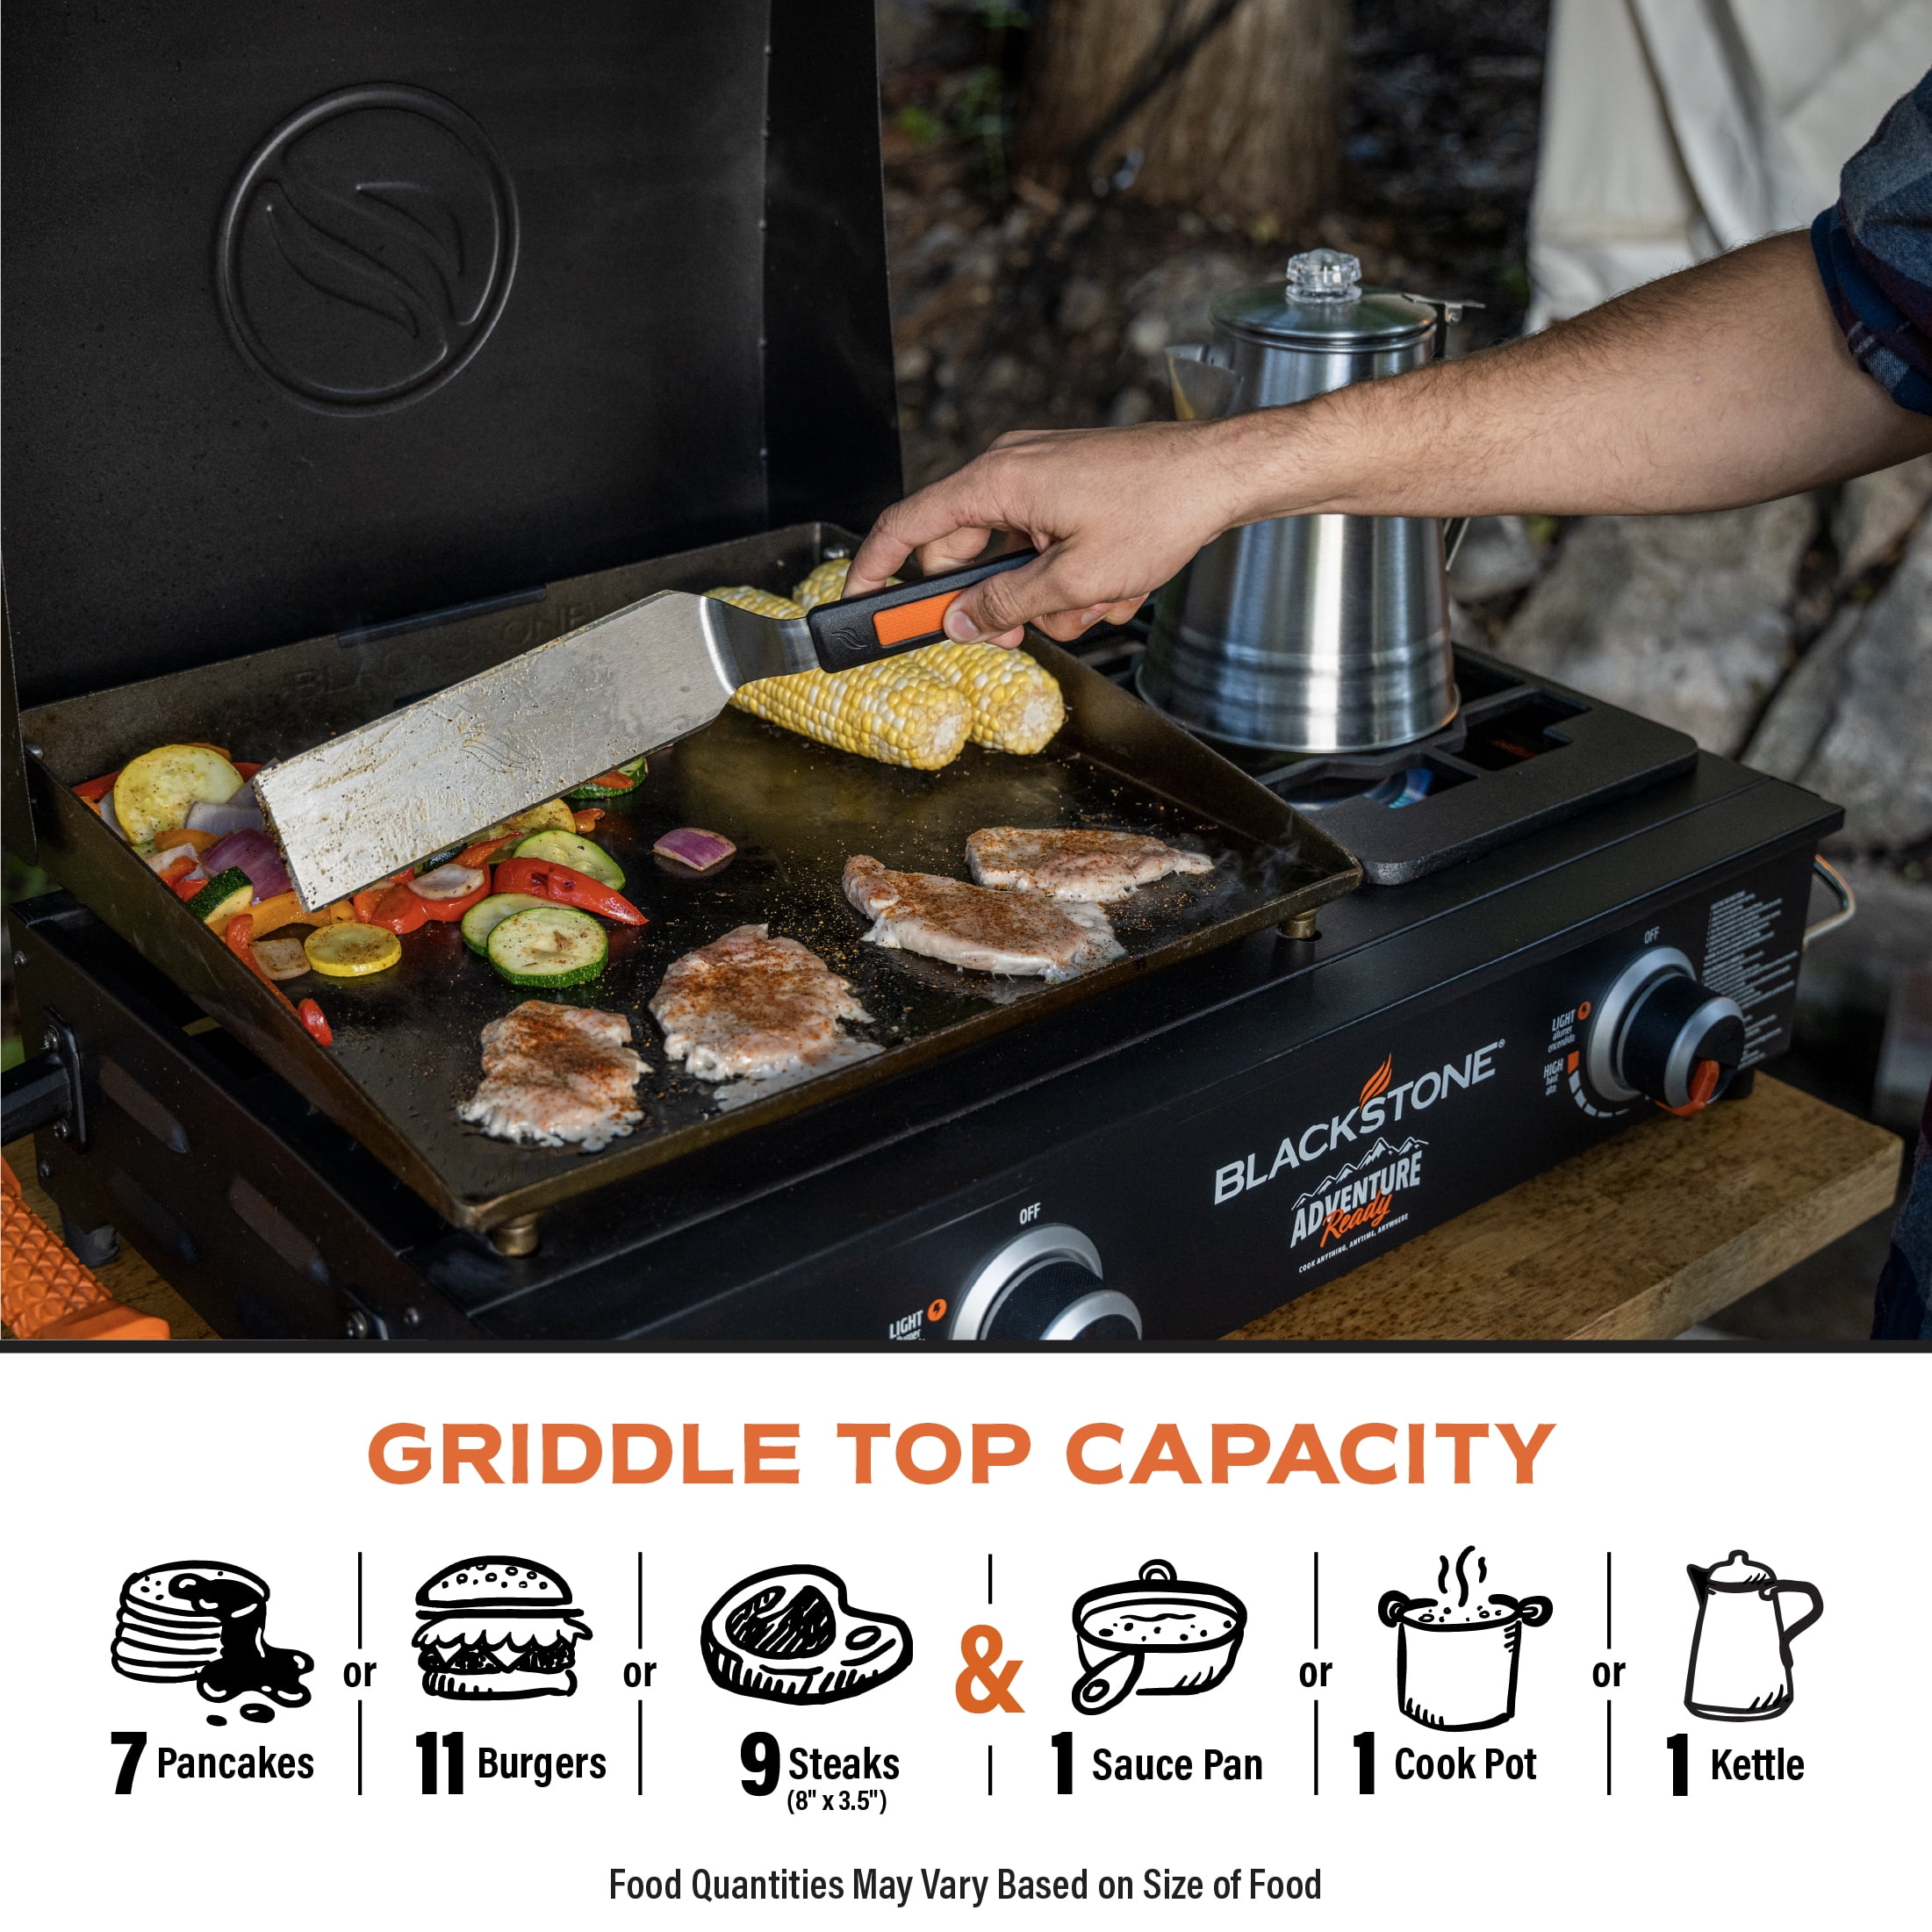 Blackstone Adventure-Ready 17 Gas Griddle with Electric Air Fryer